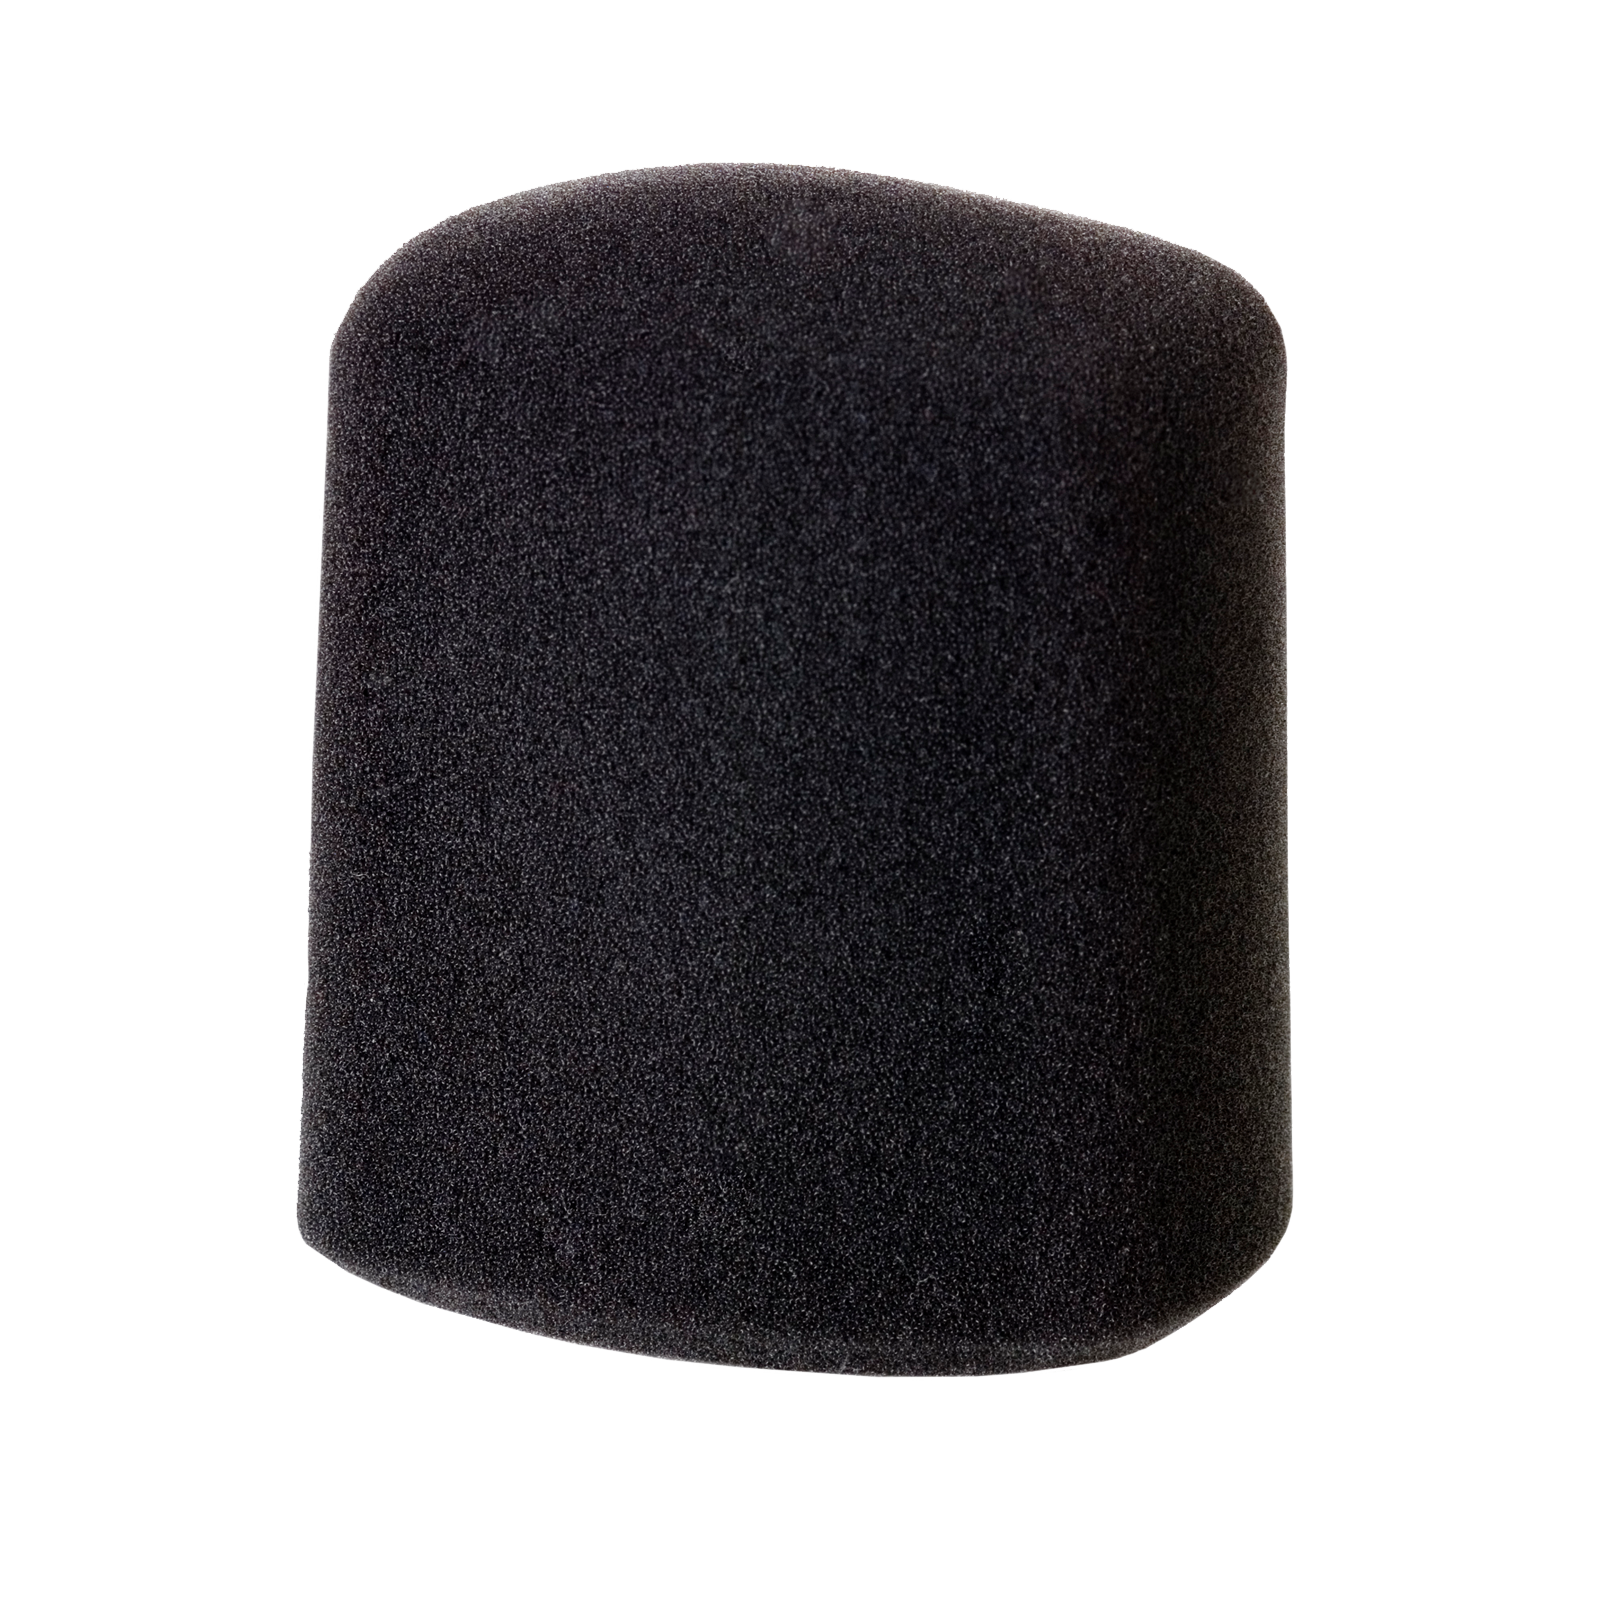 W214 - Black - Windscreen for use with C214 - Hero